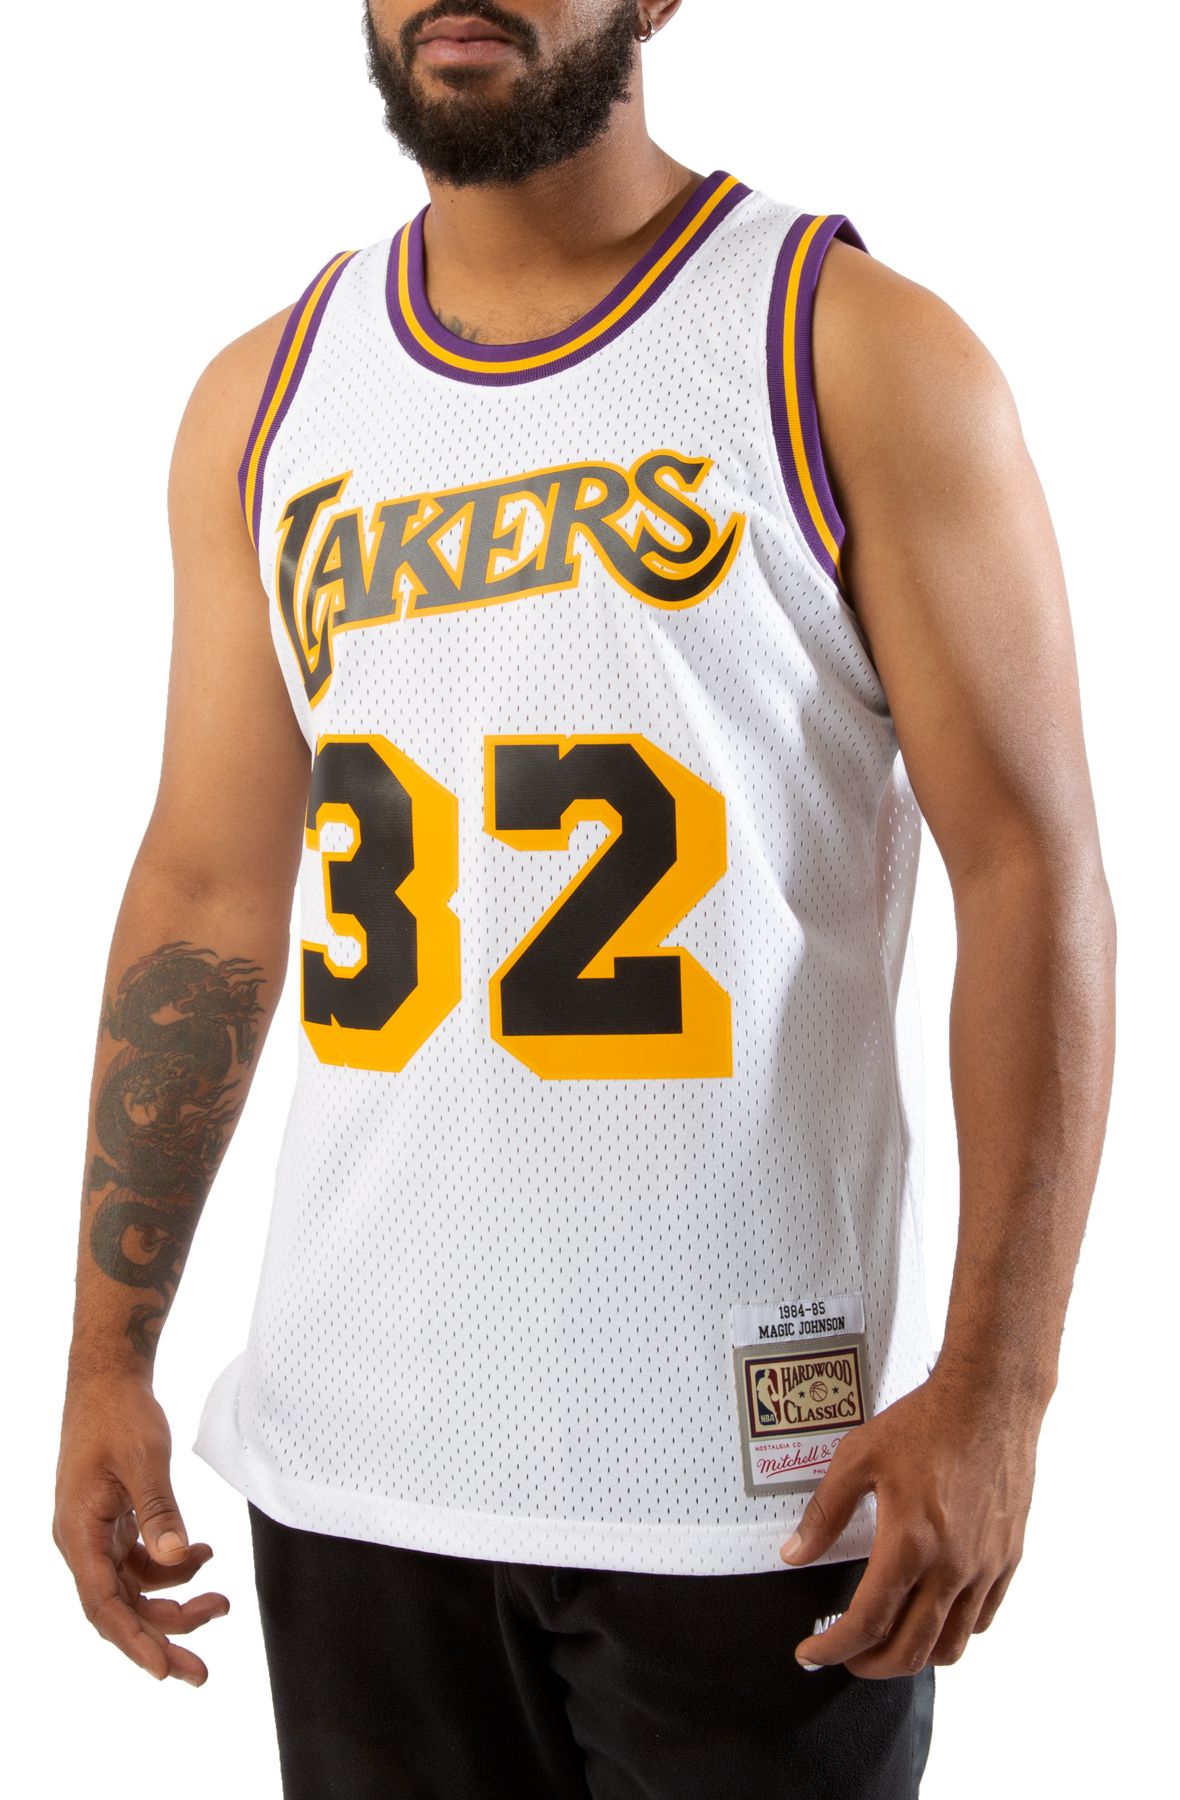 XL AUTHENTIC MAGIC JOHNSON 1984 85 LAKERS JERSEY FROM THE NBA STORE for  Sale in La Mesa, CA - OfferUp